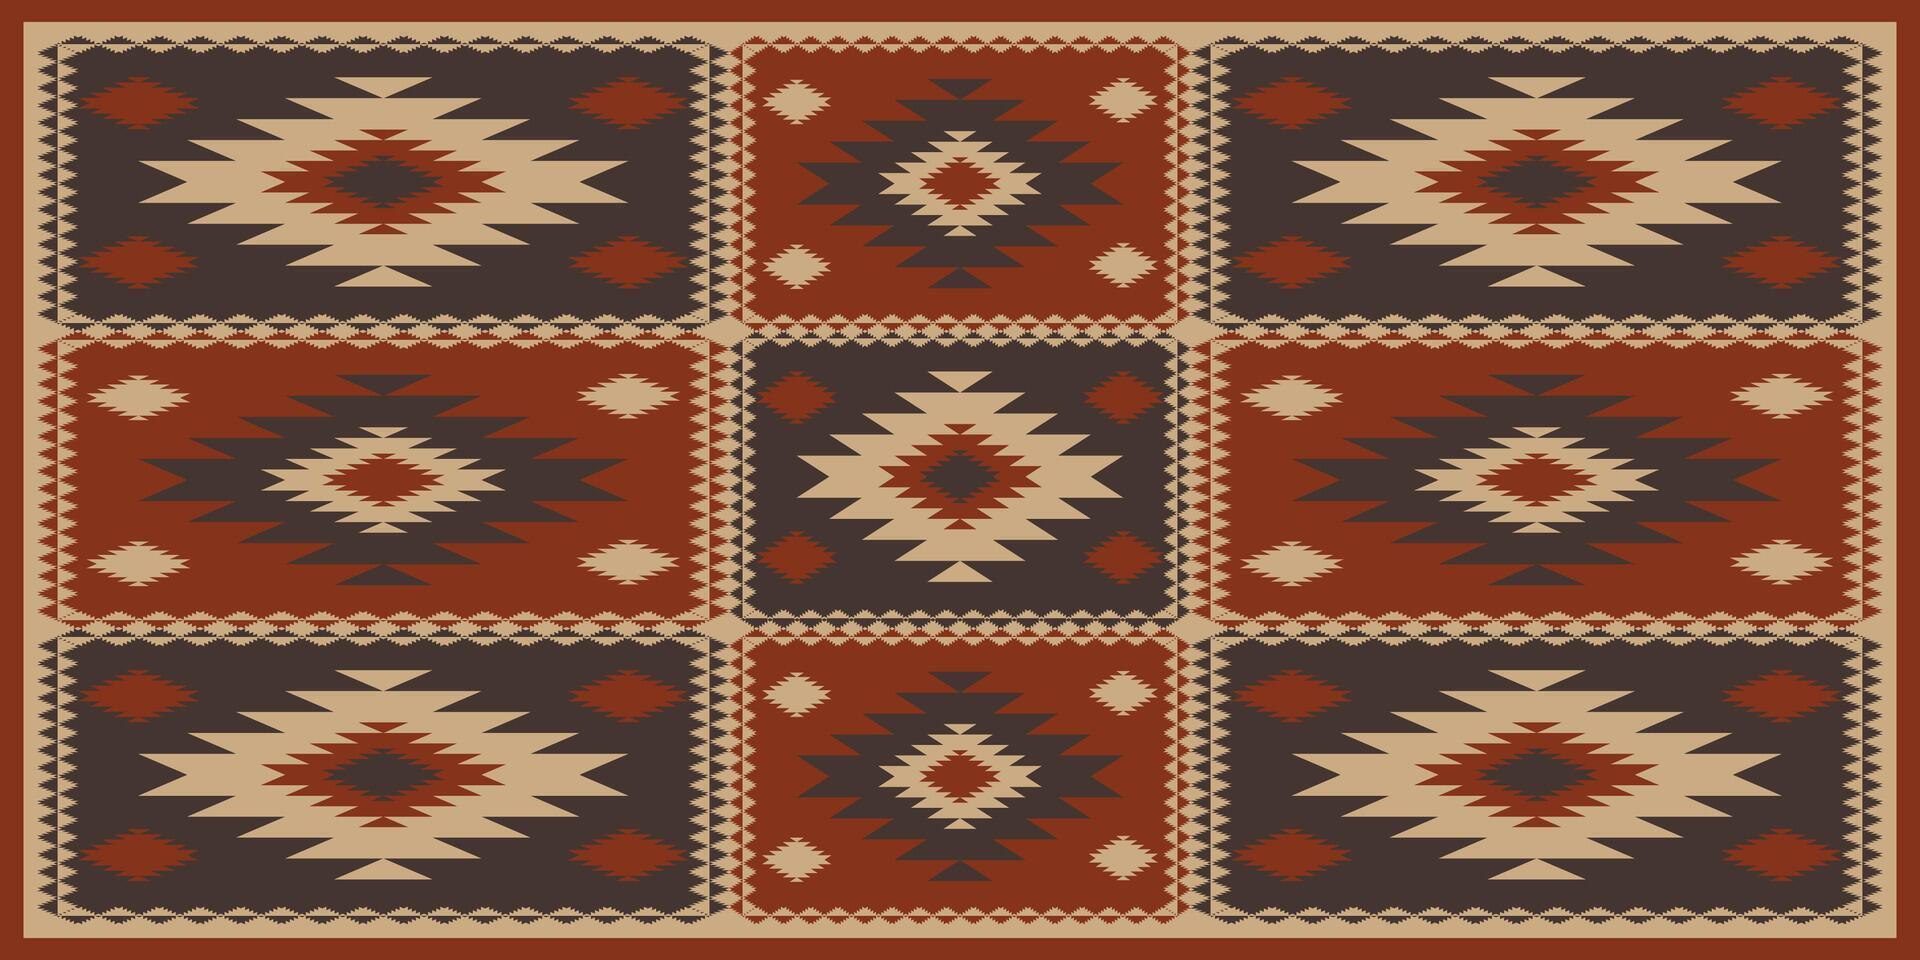 Aztec Southwest patchwork pattern. Southwestern Navajo geometric patchwork pattern rustic bohemian style. Ethnic geometric pattern use for rug, tablecloth, quilt, cushion, upholstery, etc. vector